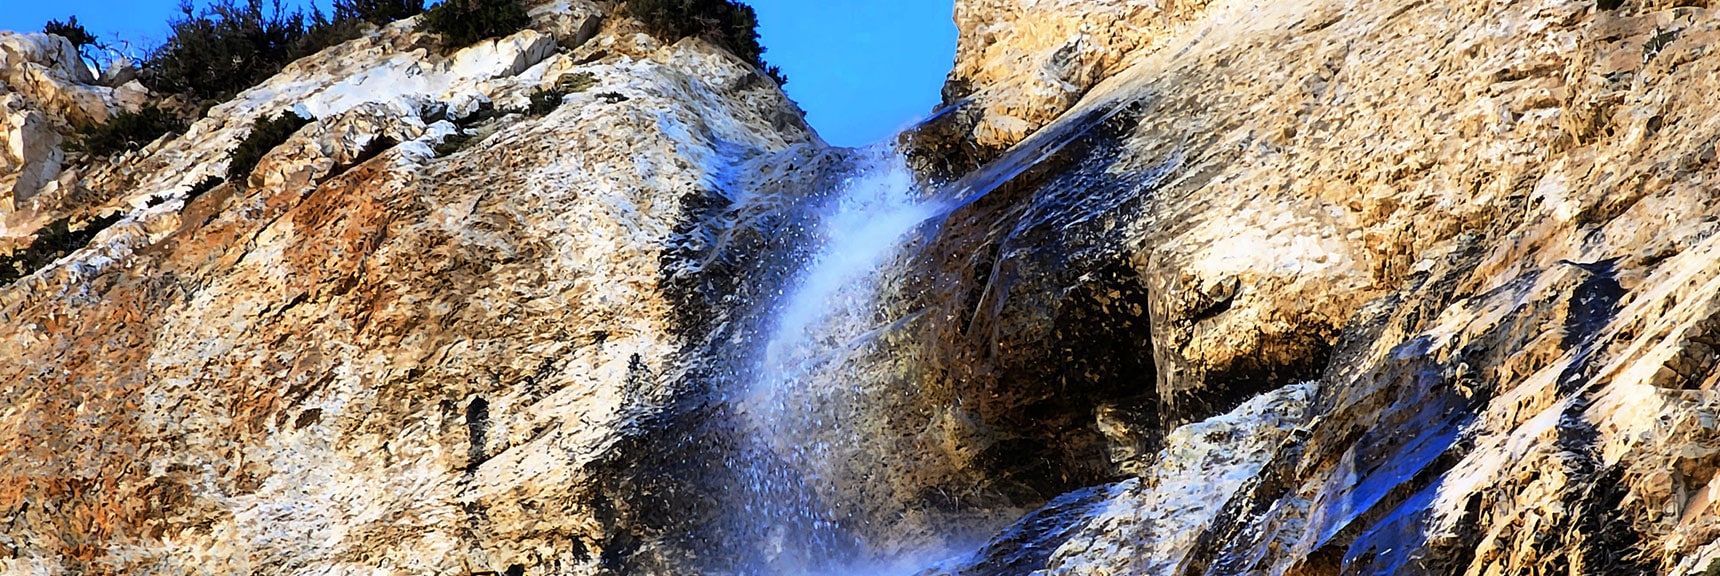 Greatest Volume of Water in Recent Years | Mary Jane Falls | Mt. Charleston Wilderness | Spring Mountains, Nevada